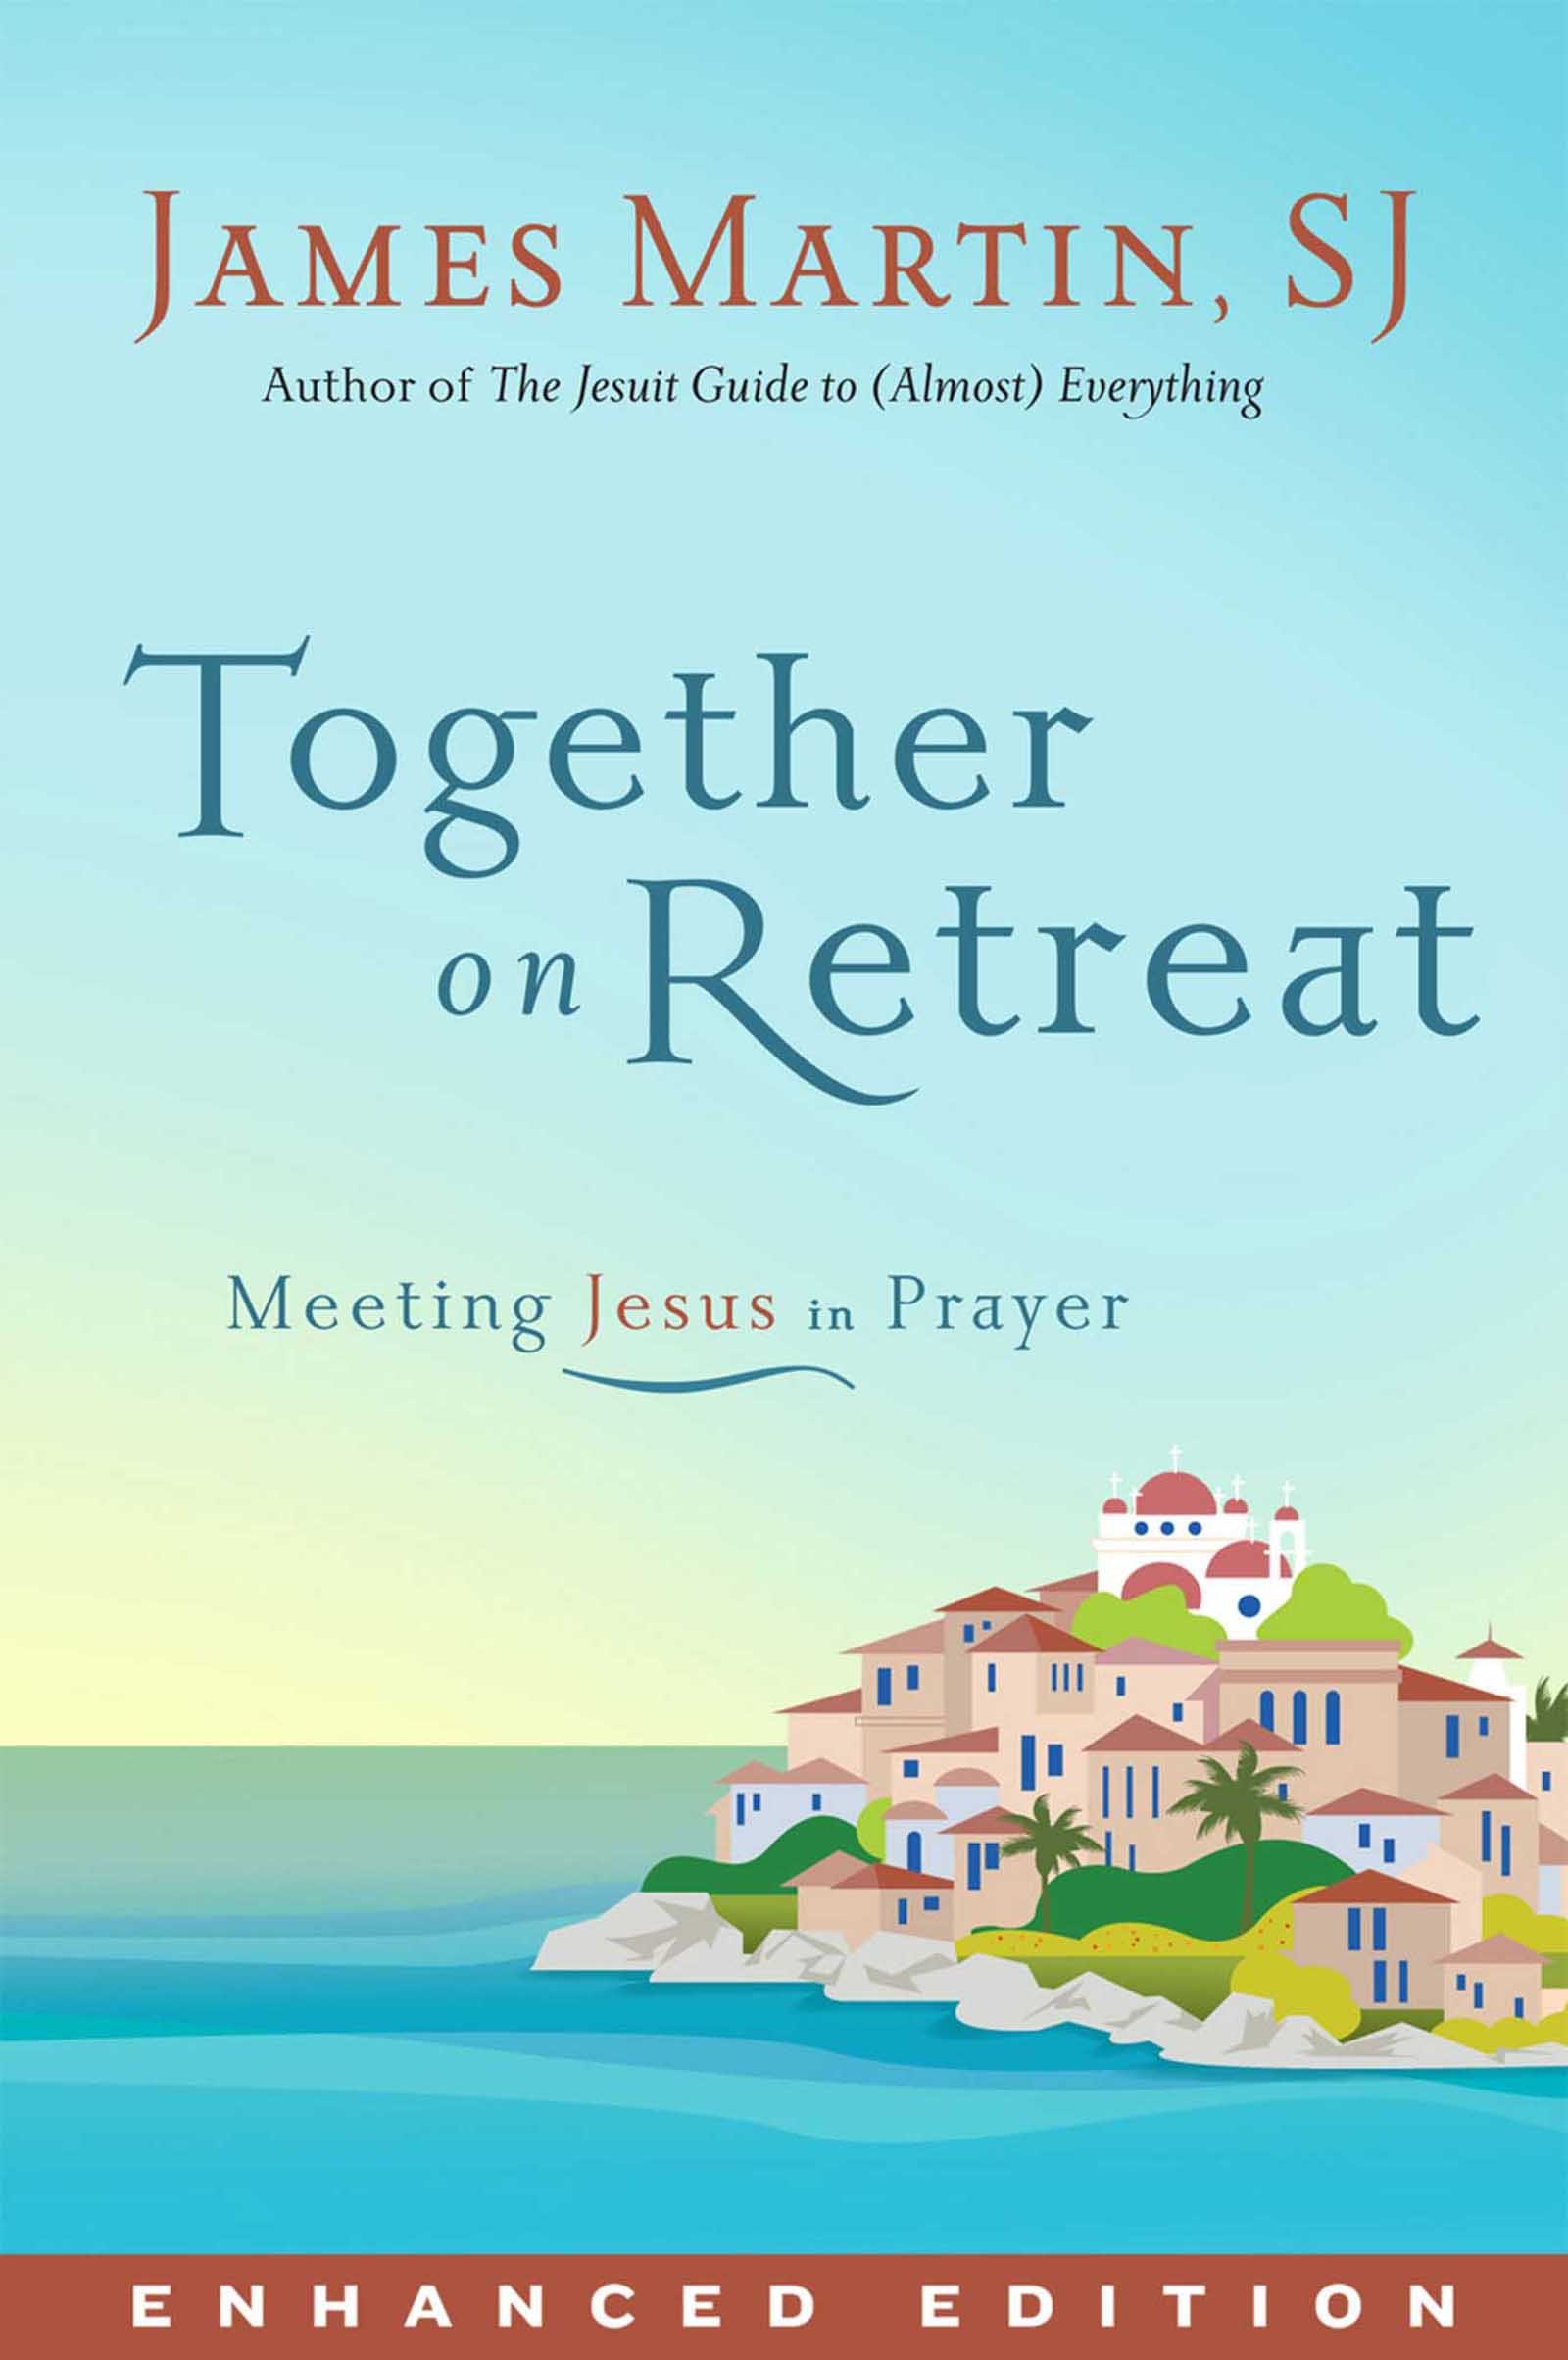 Together on Retreat (Enhanced Edition): Meeting Jesus in Prayer